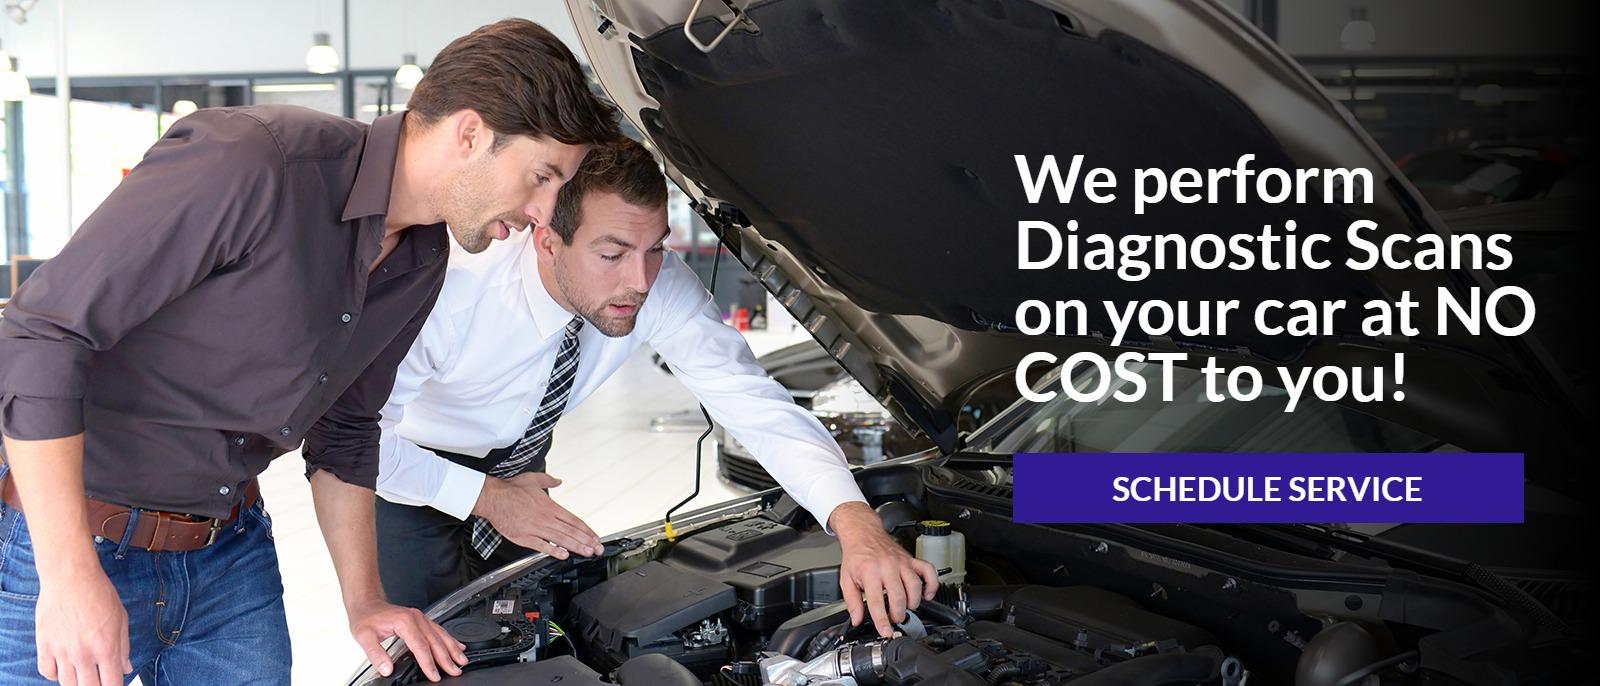 We perform Diagnostic Scans on your car at NO COST to you!